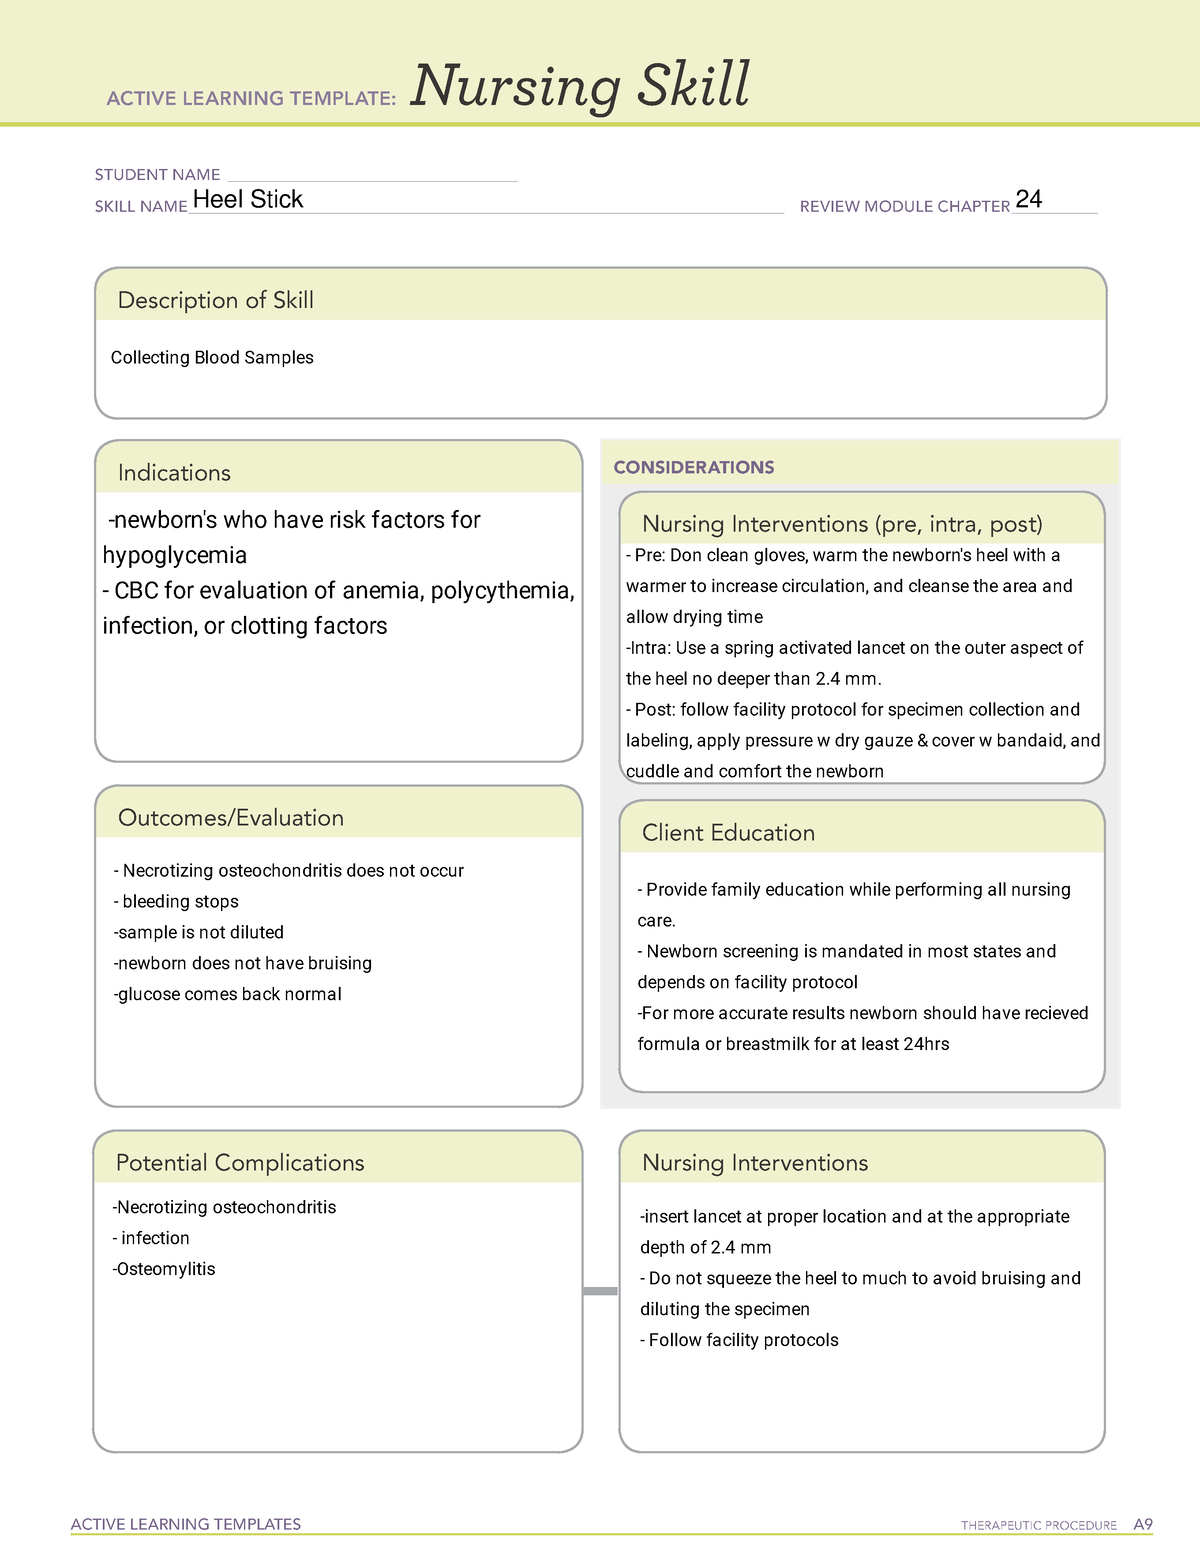 Heel Stick Active Learning Template Nursing Skill form - ACTIVE ...